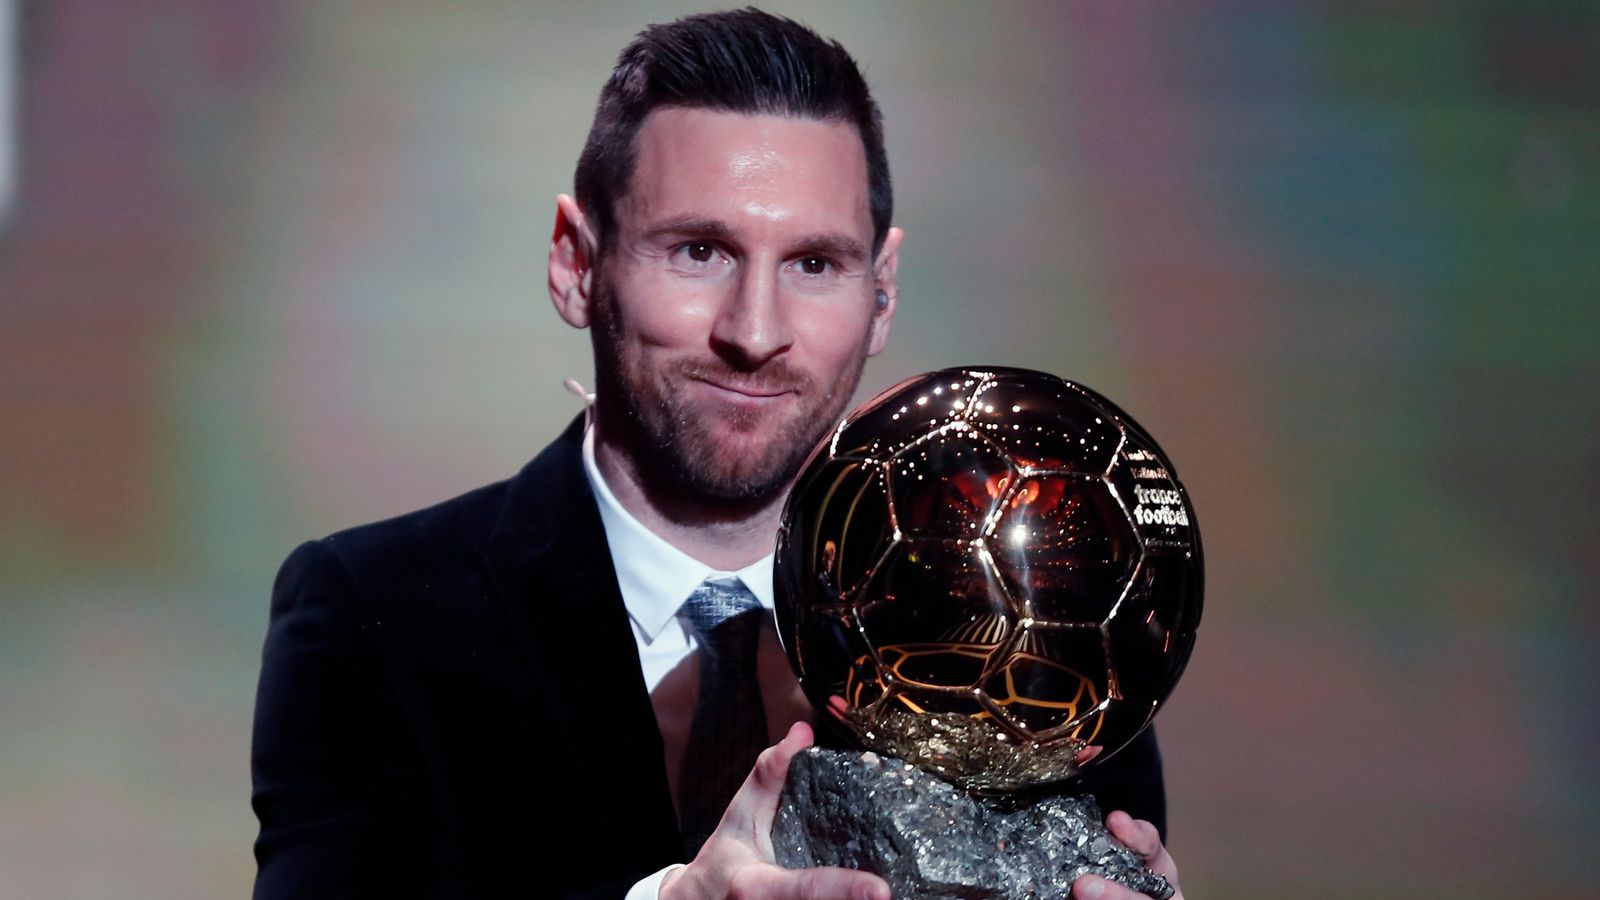 Ballon d'Or 2021: Lionel Messi strong favourite to win record seventh men's title tonight